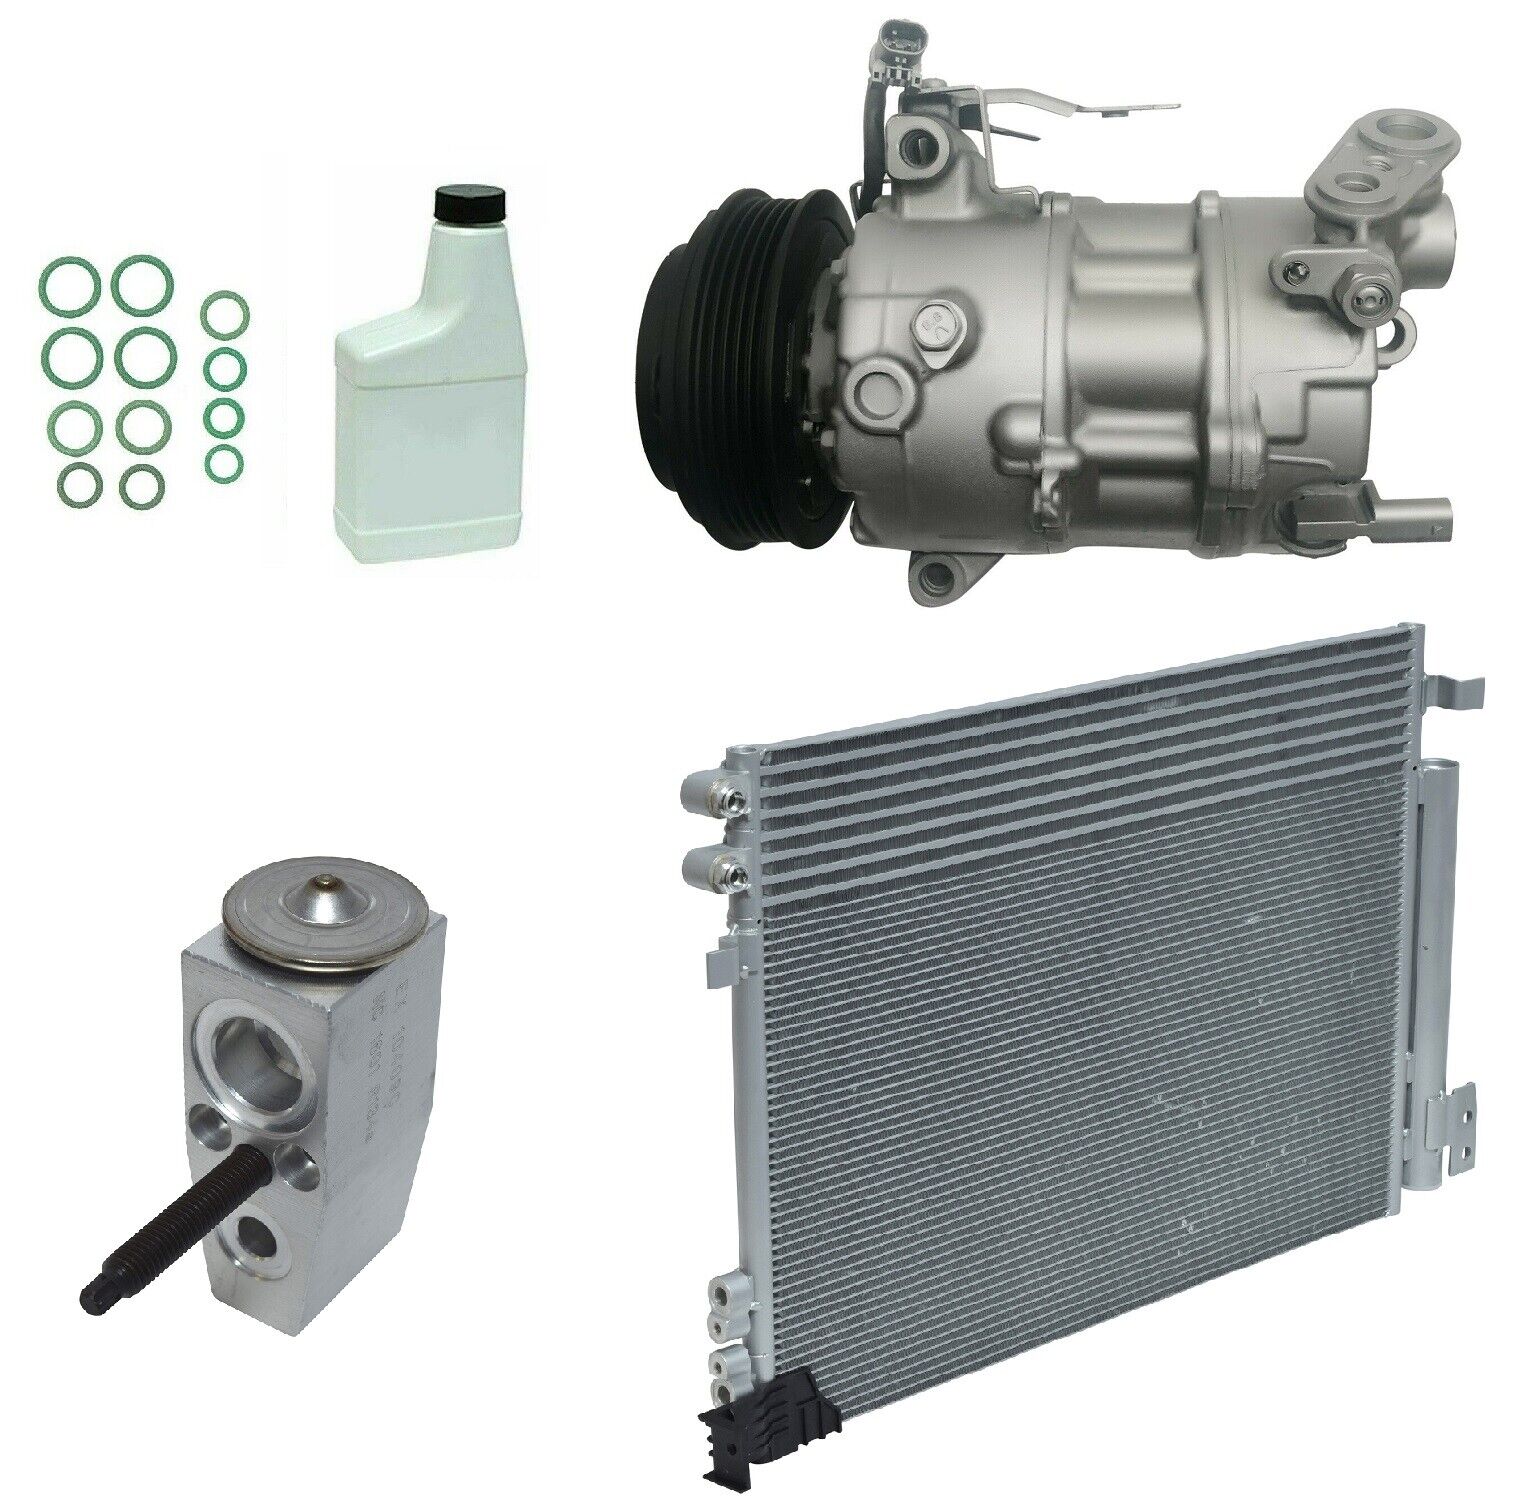 RYC Remanufactured Complete AC Compressor Kit AC69 (AAGG333) With Condenser